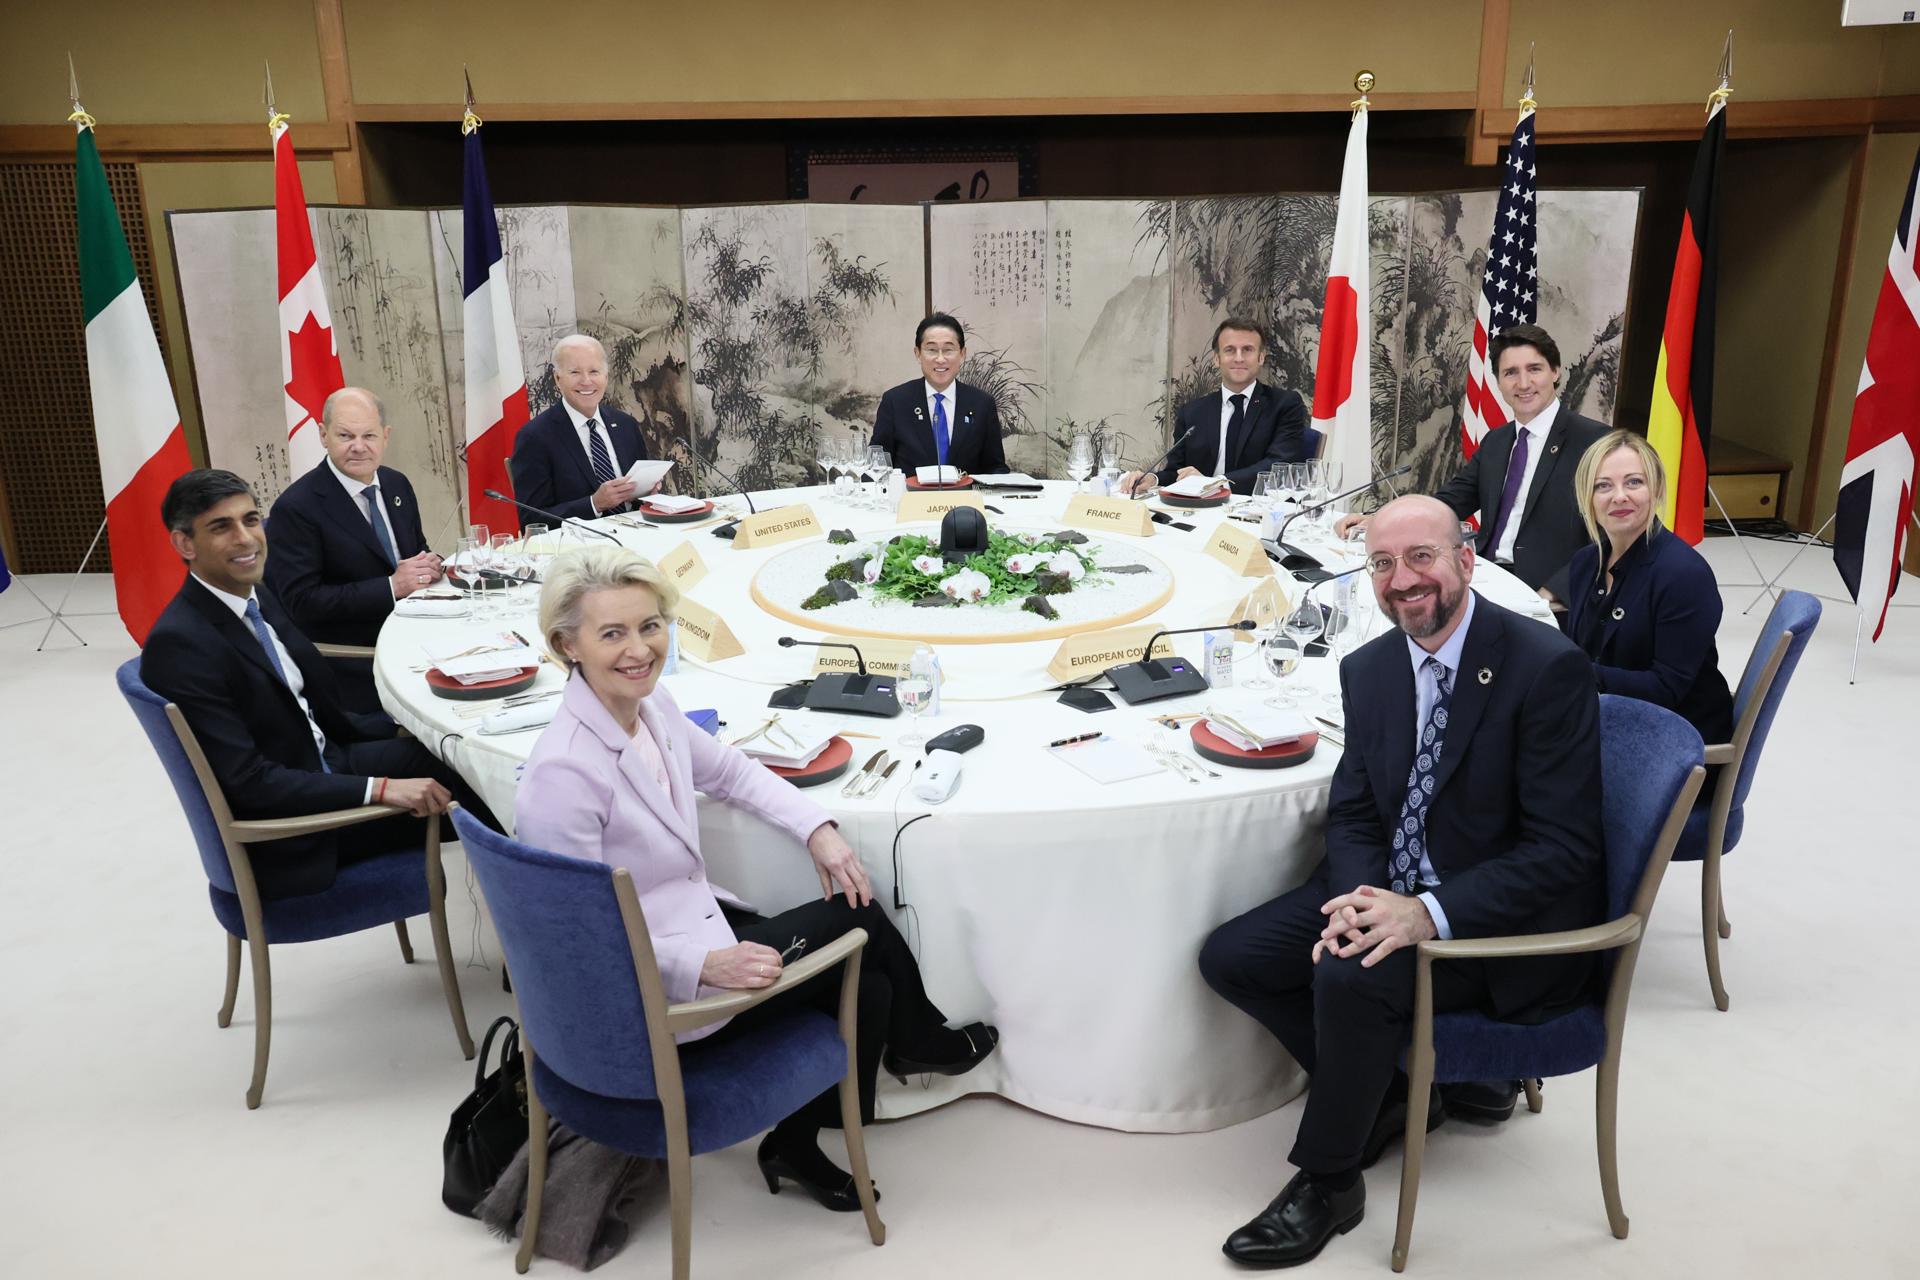 A handout photo made available by the G7 Hiroshima Summit Host shows (L-R front, clockwise) European Commission President Ursula von der Leyen, Britain's Prime Minister Rishi Sunak, Germany's Chancellor Olaf Scholz, US President Joe Biden, Japan's Prime Minister Fumio Kishida, France's President Emmanuel Macron, Canada's Prime Minister Justin Trudeau, Italy's Prime Minister Giorgia Meloni and European Council President Charles Michel posing for a group photo at a working dinner during the G7 Hiroshima Summit in Hiroshima, Japan, 19 May 2023. EFE/EPA/G7 HIROSHIMA SUMMIT HOST HANDOUT HANDOUT EDITORIAL USE ONLY/NO SALES